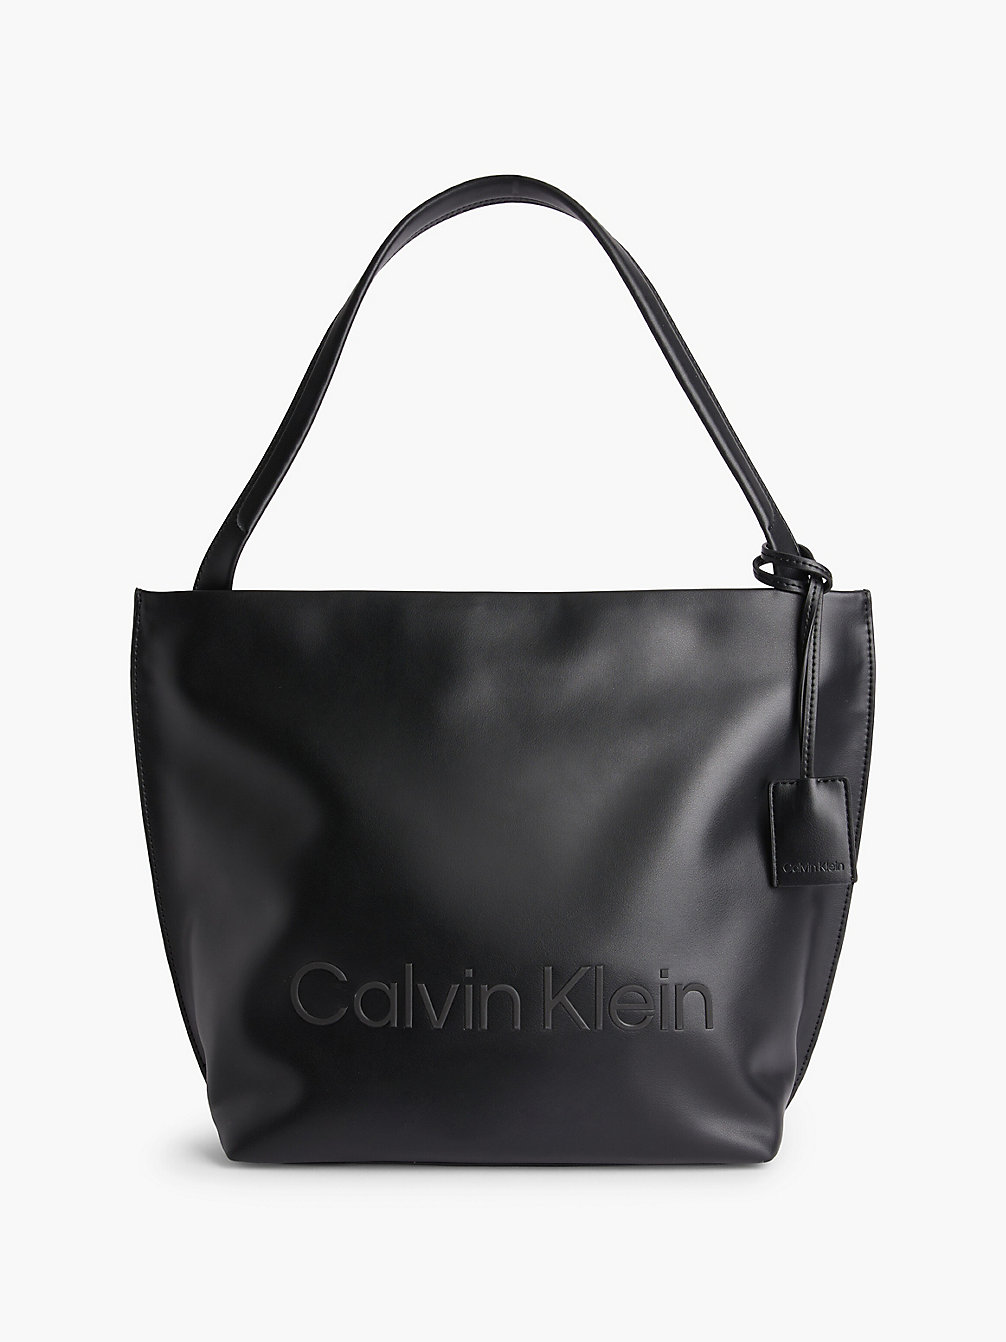 CK BLACK Recycled Soft Tote Bag undefined women Calvin Klein